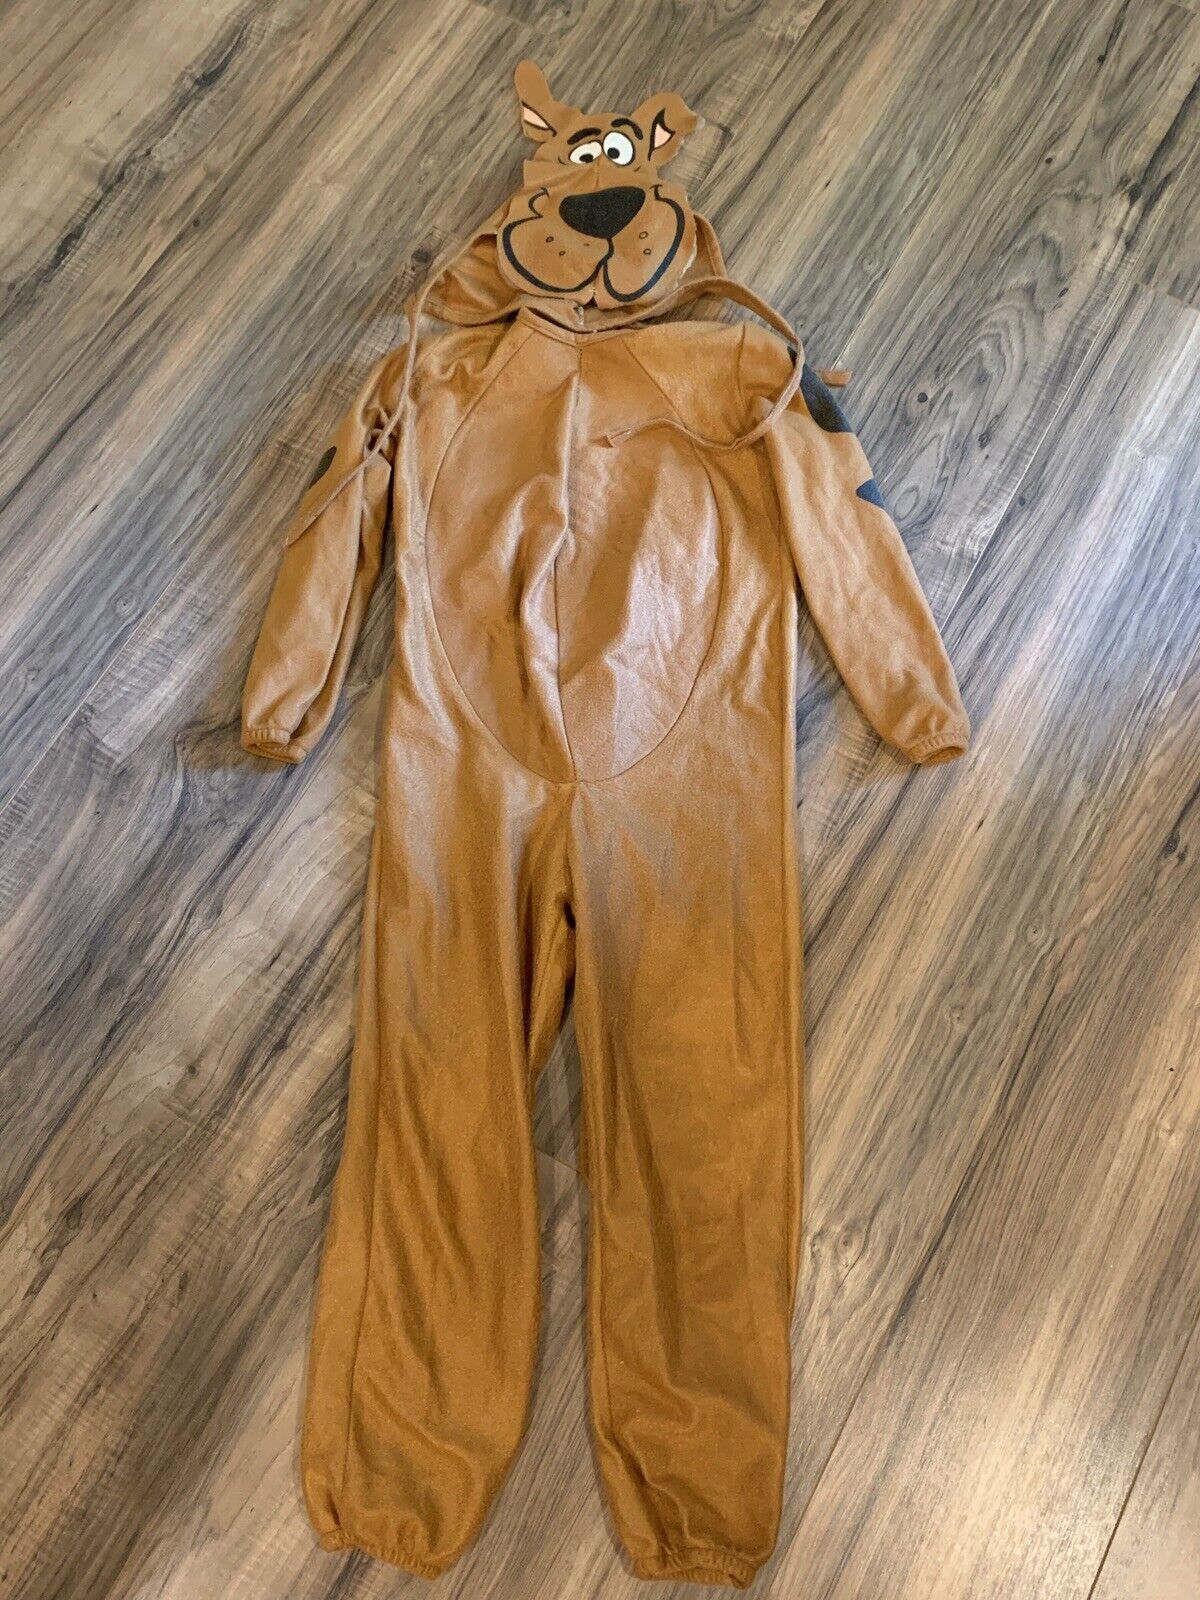 Vintage 1970s Scooby Doo Child Costume Collectible